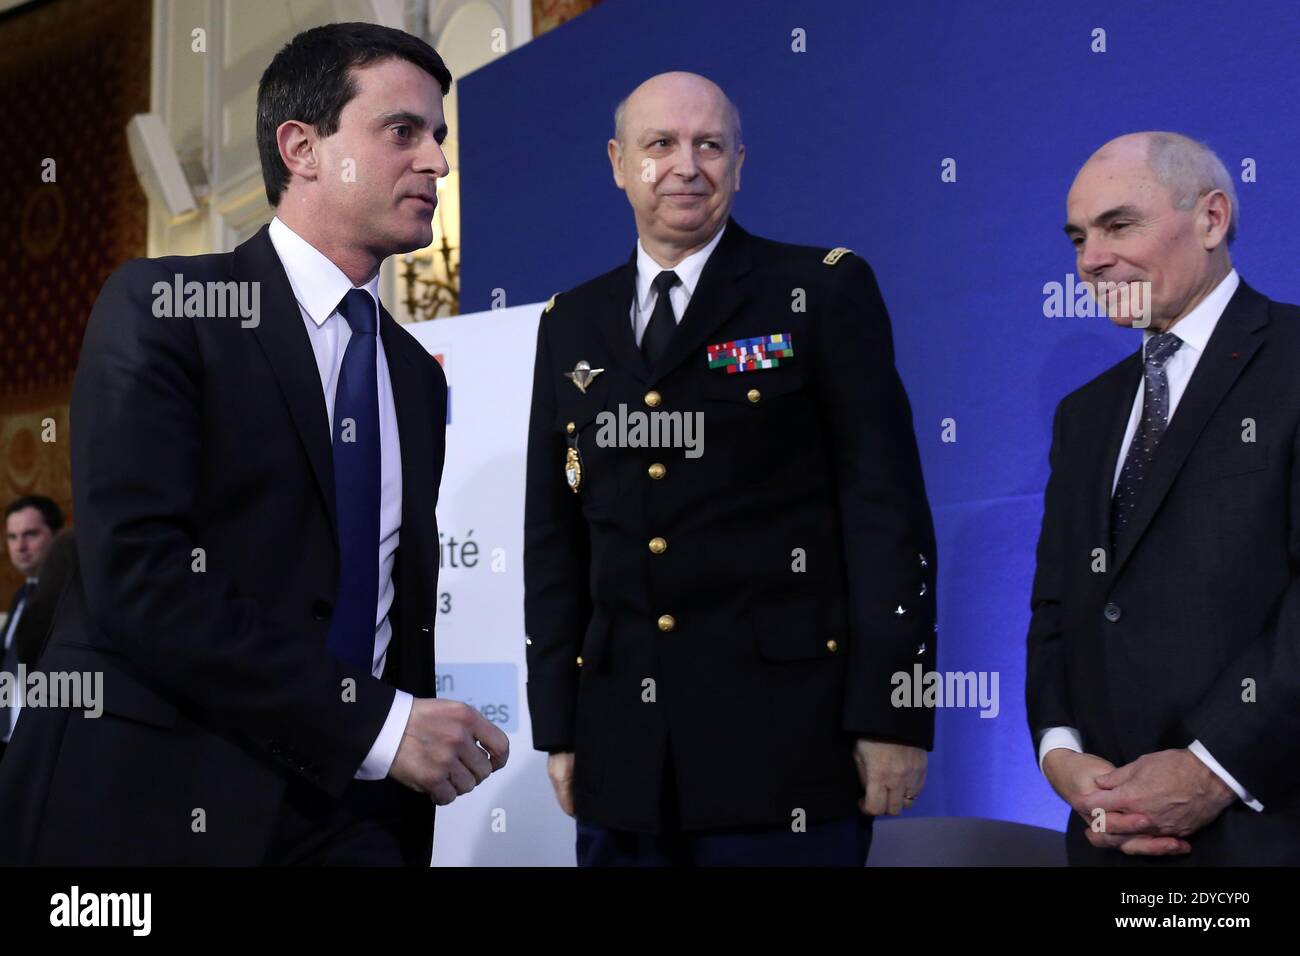 French Interior minister, Manuel Valls arrives next to Jacques Mignaux, general director of the gendarmerie nationale and Thierry Lataste, chief of staff of French Interior minister to present the report of the past year and the prospects of the security policy for the upcoming year, in Paris, France on January 18, 2013 Photo by Stephane Lemouton/ABACAPRESS.COM. Stock Photo